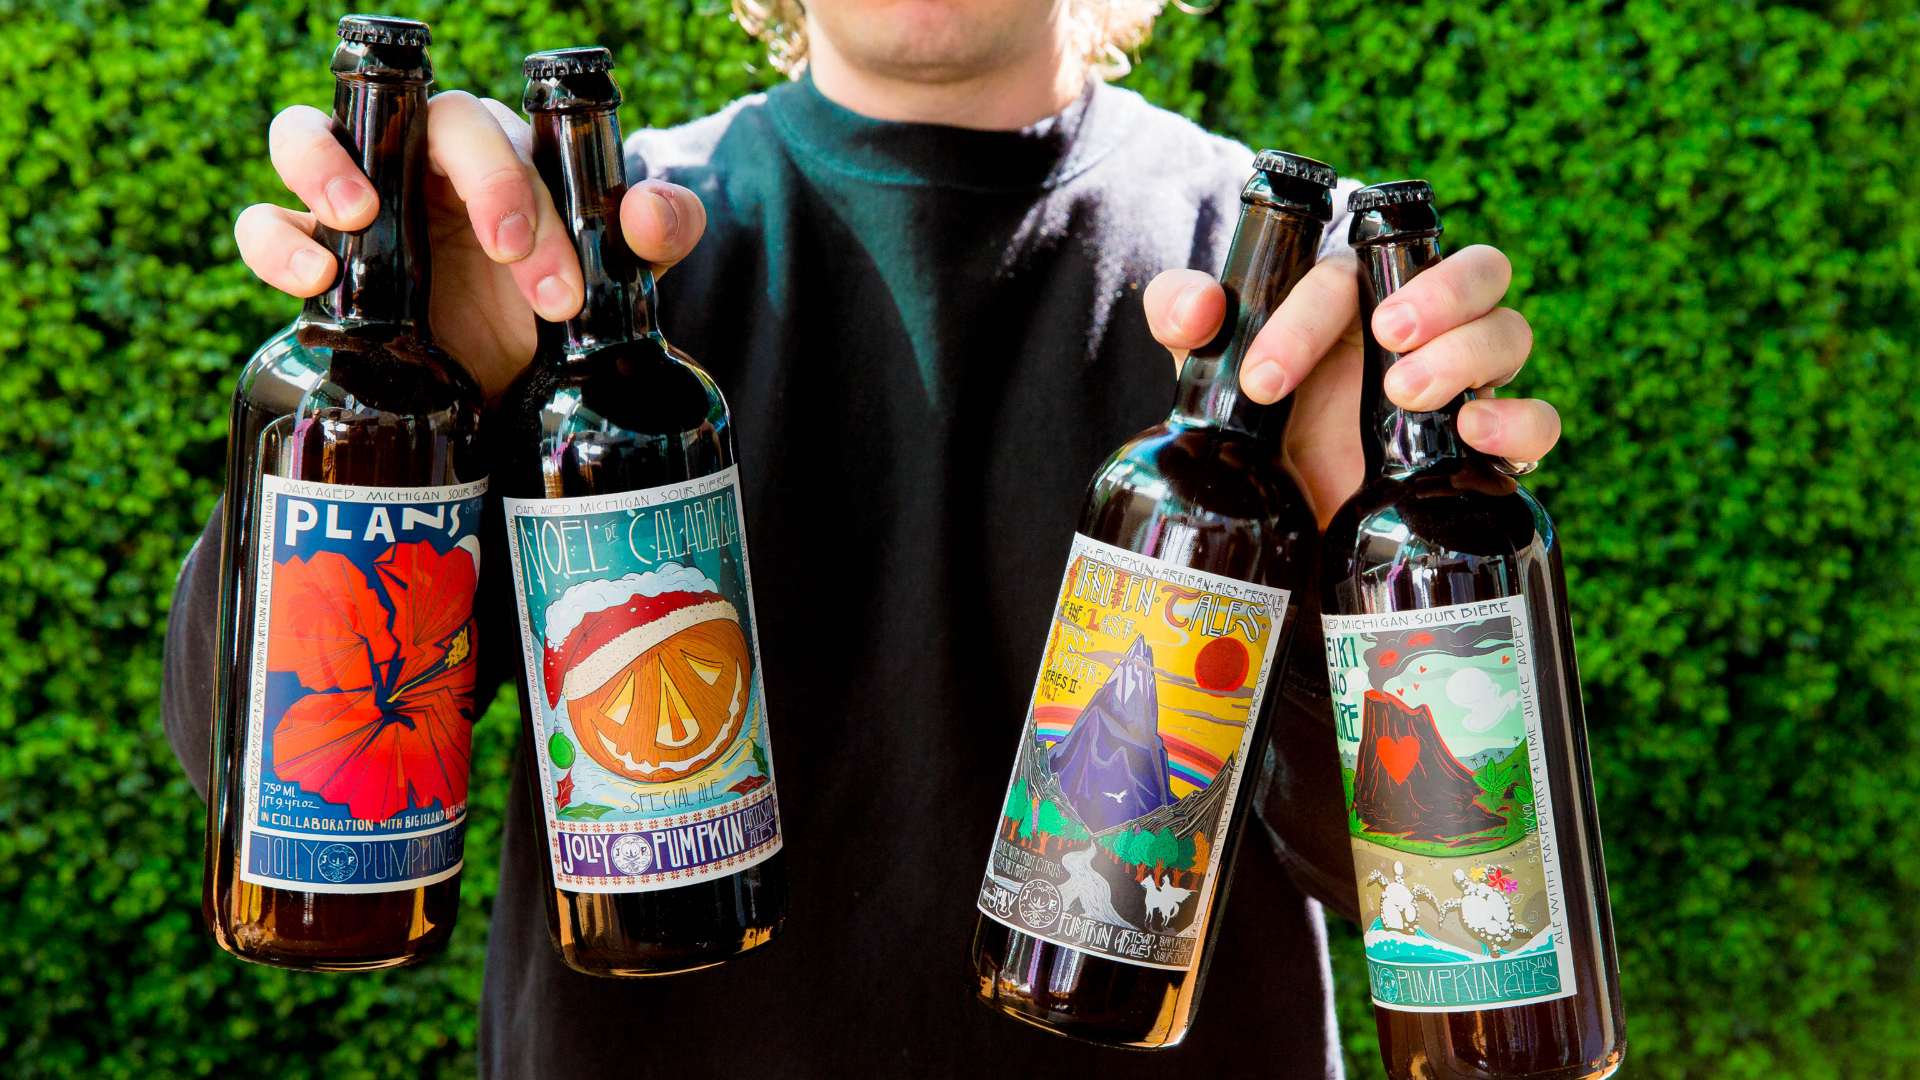 Beer DeLuxe's New Online Shop Lets You Buy Rare Drops from Its Impressive Cellar Collection